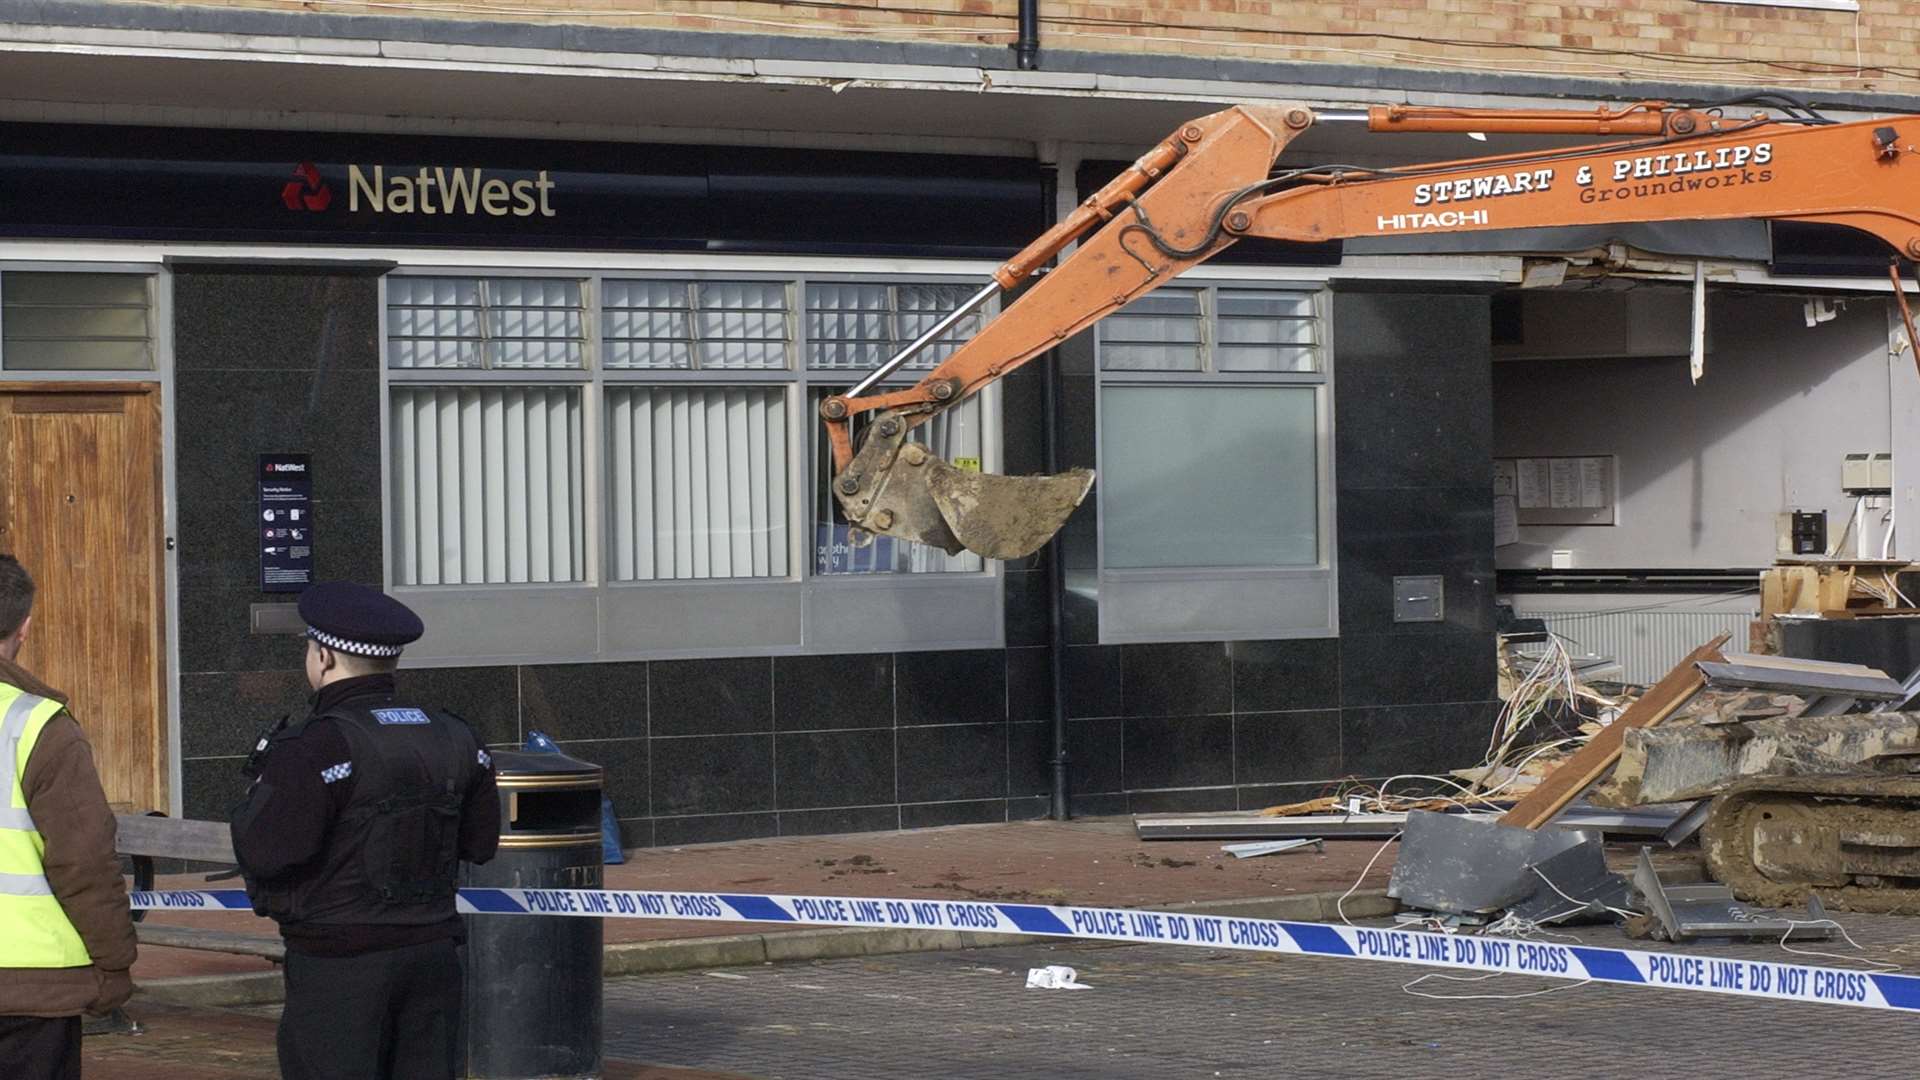 The excavator used in the bank raid in Staplehurst in 2007. Picture John Wardley